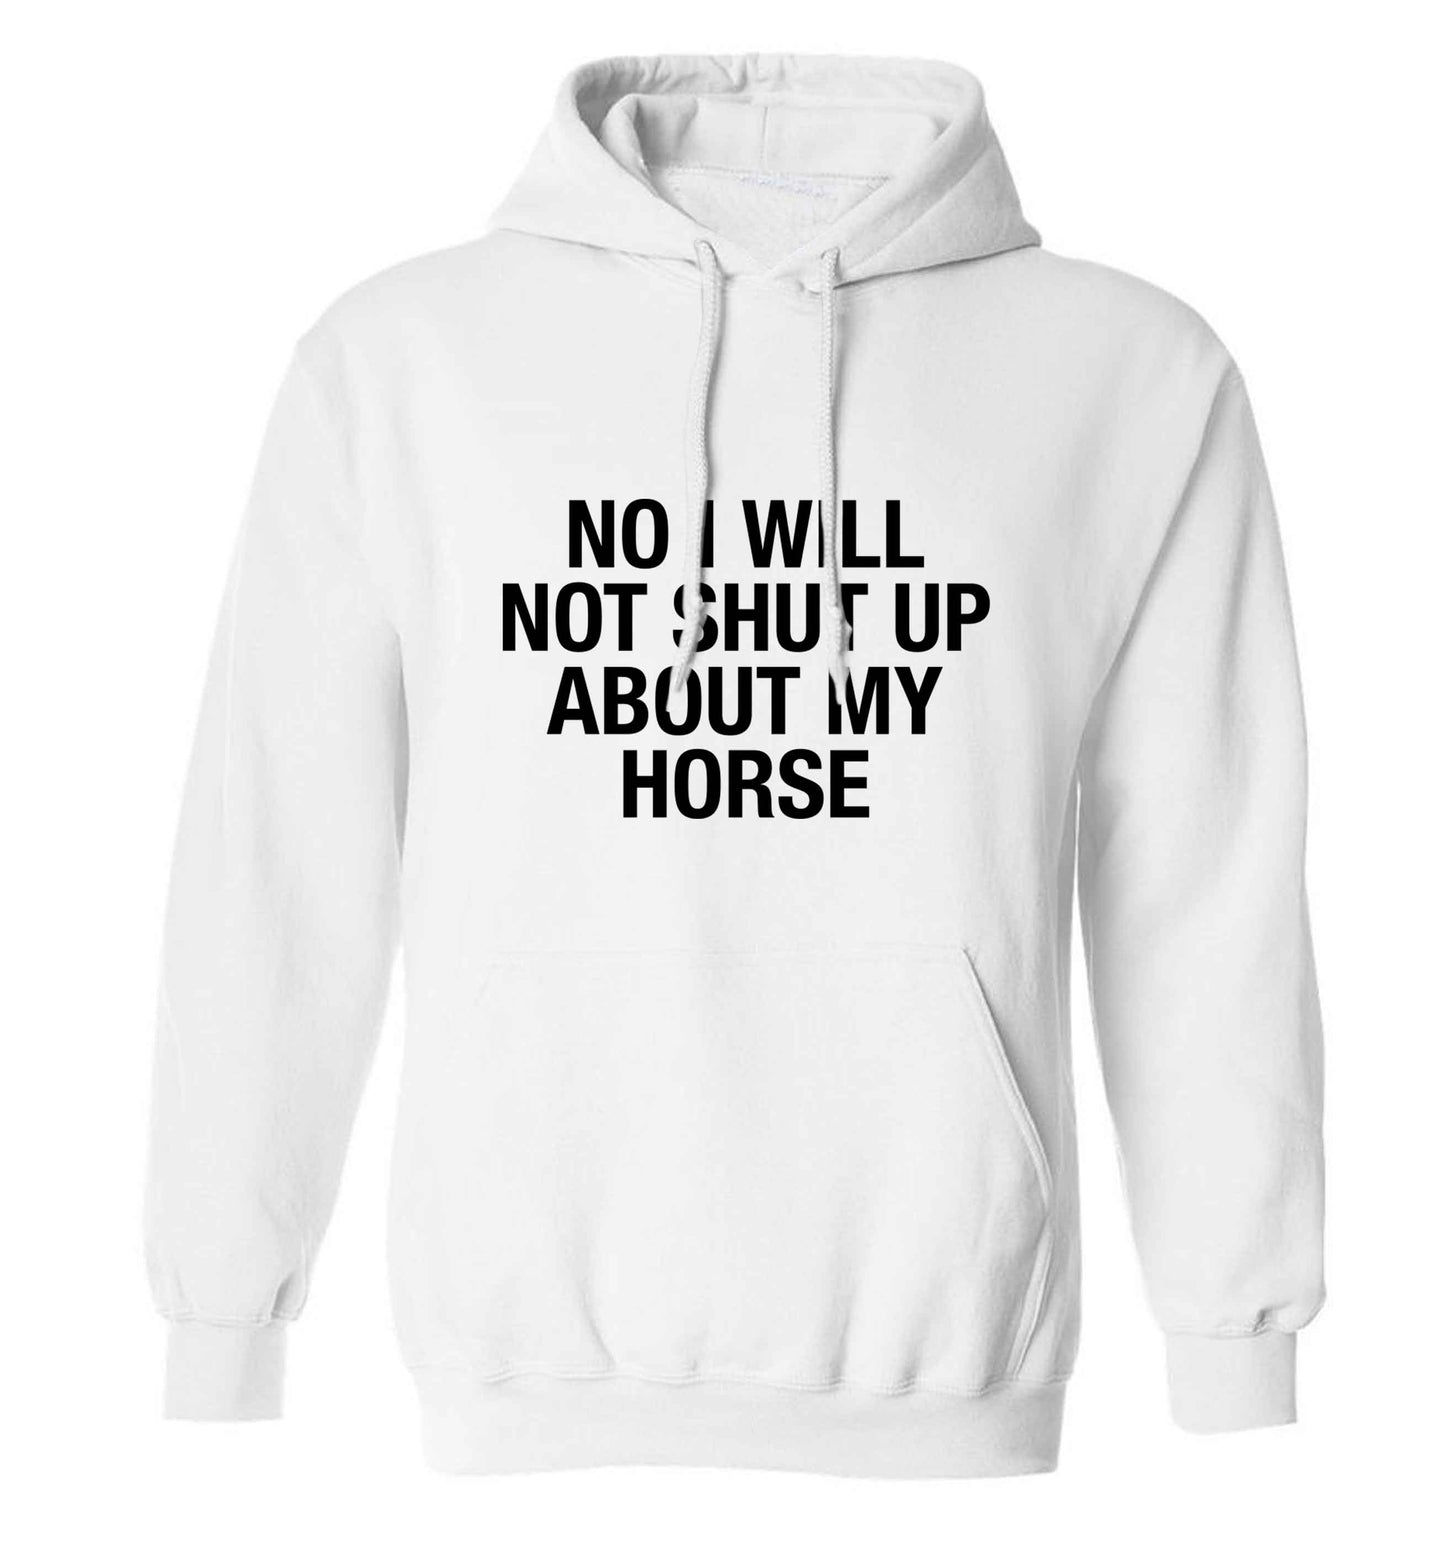 No I will not shut up talking about my horse adults unisex white hoodie 2XL